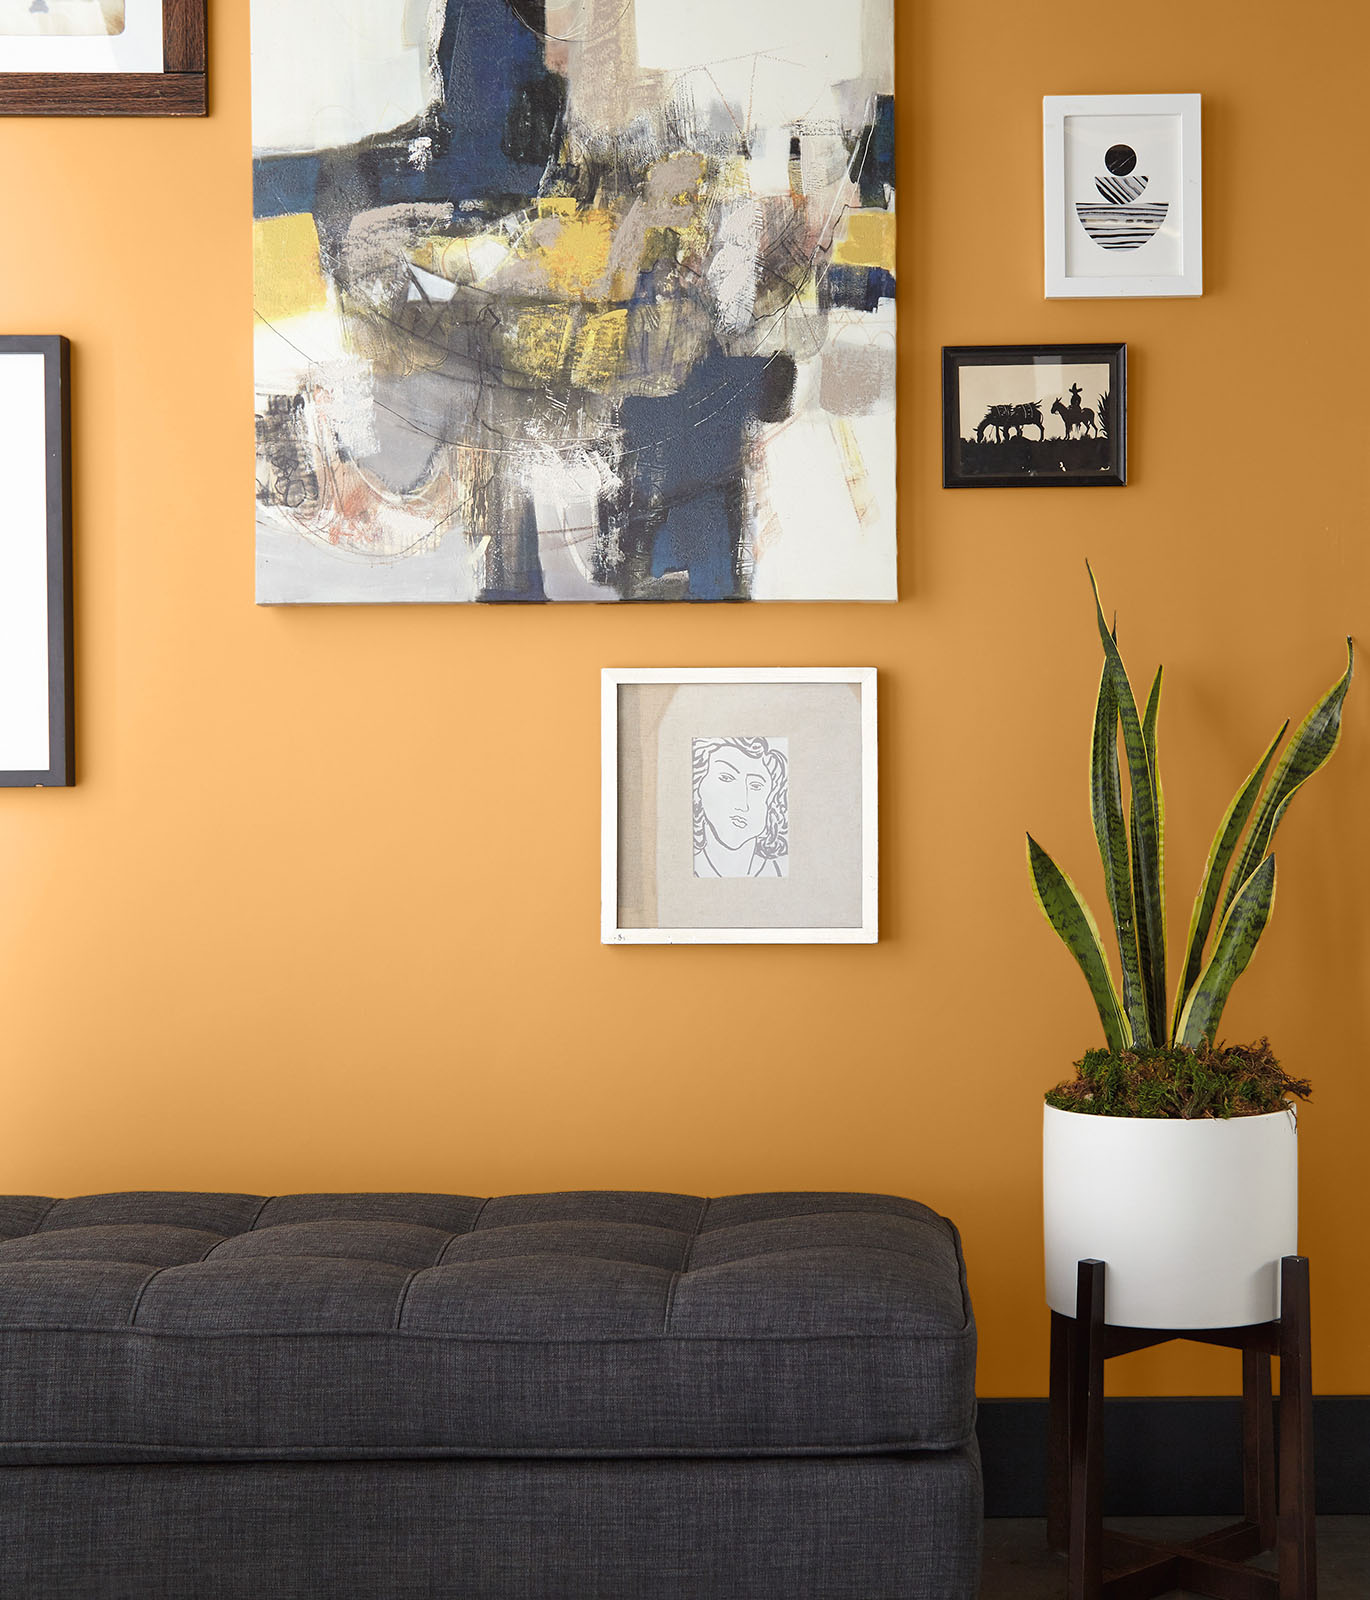 A living room painted in golden-yellow with a gray couch. The wall is filled with hanging art work. The room feels optimistic and bright. 